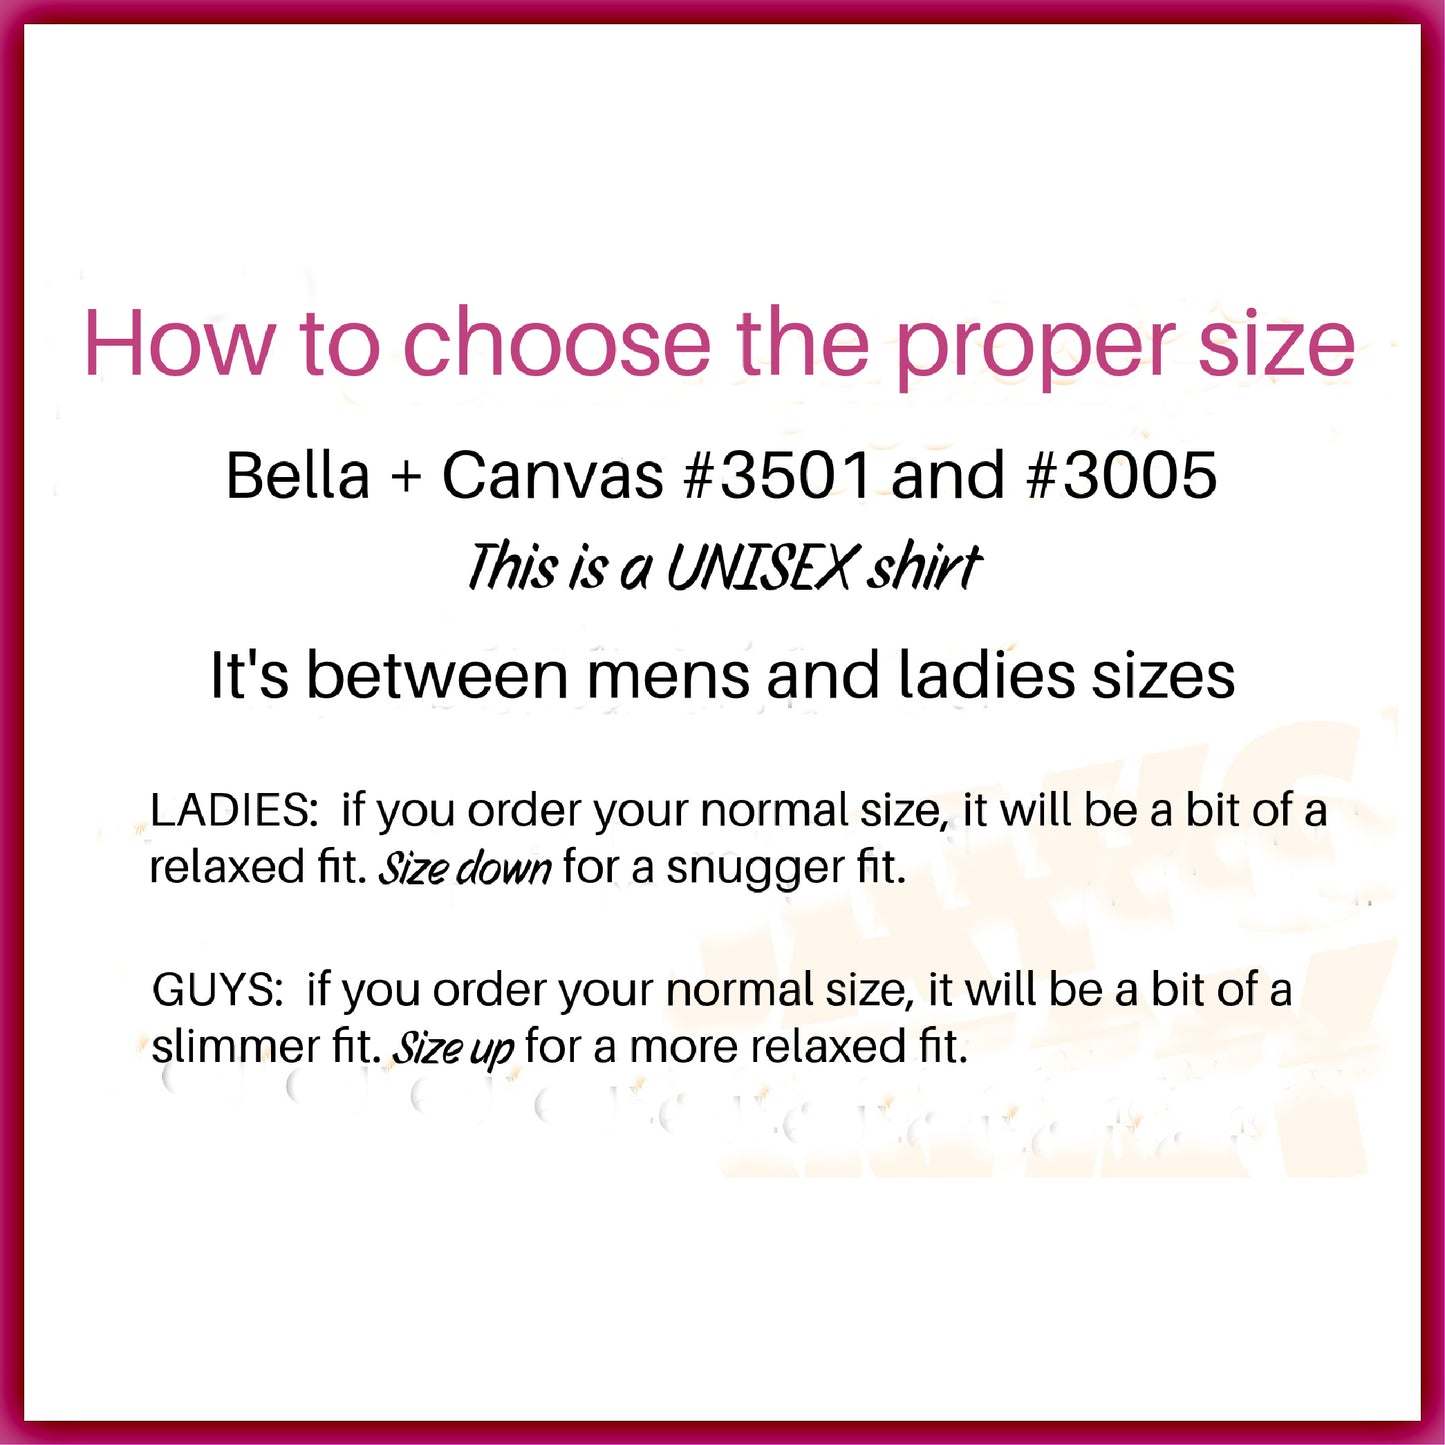 Instructions for choosing proper size